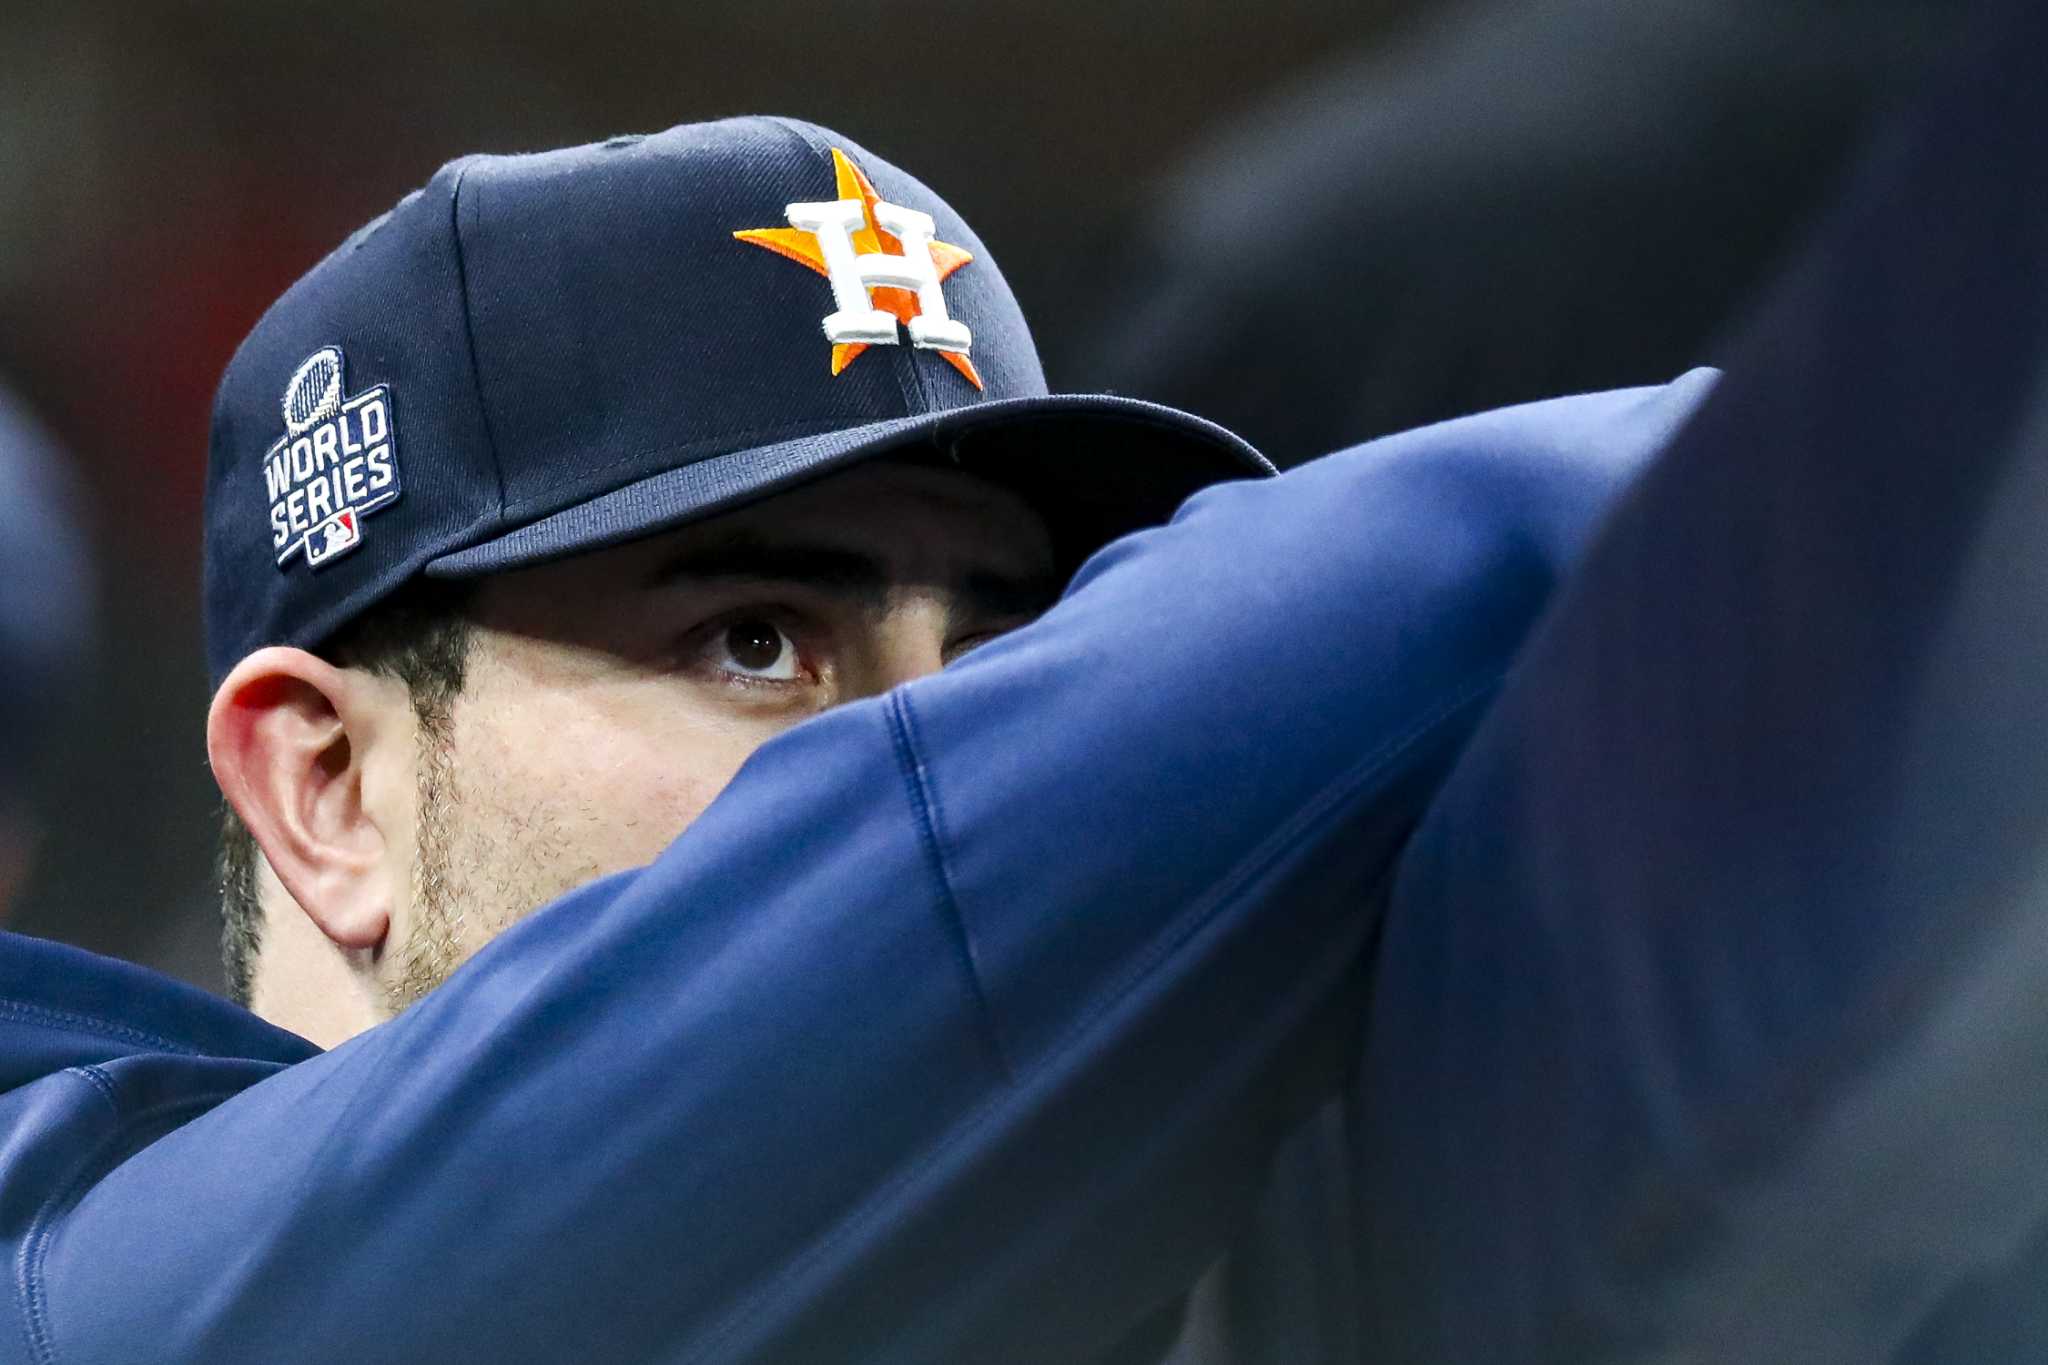 Michael Schwab on X: These Astros Spring Training trucker hats are nice   / X